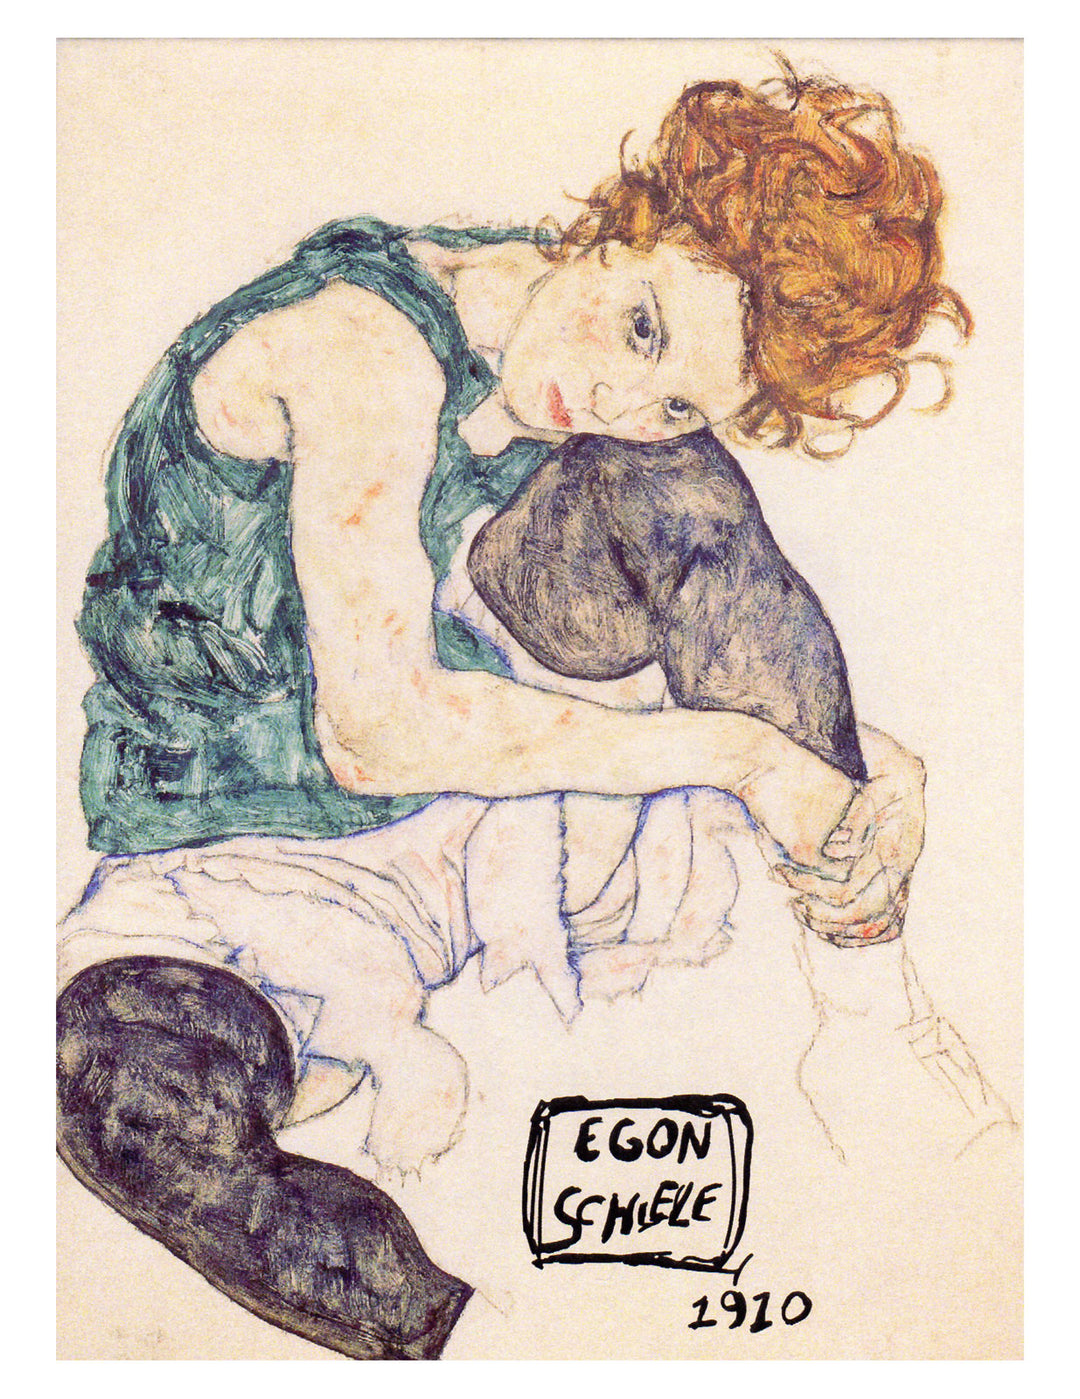 Egon Schiele Note Cards - Boxed Set of 16 Note Cards with Envelopes